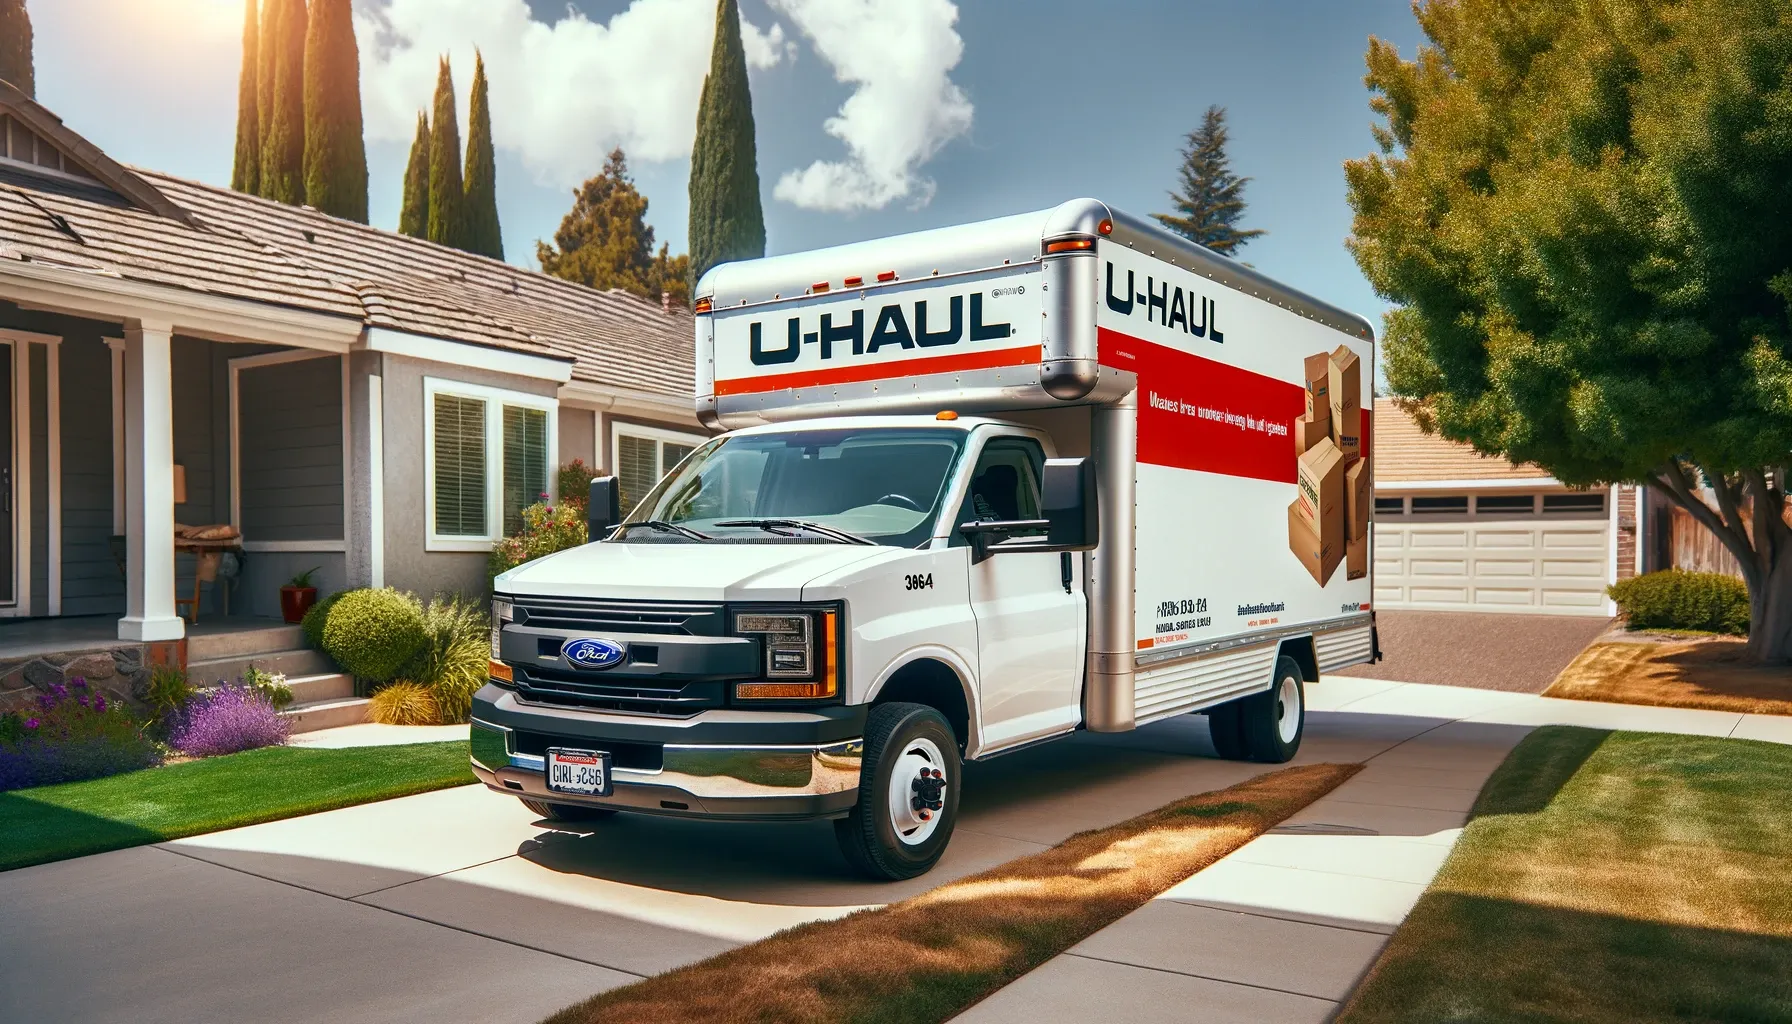 How to Secure a Uhaul Truck Overnight